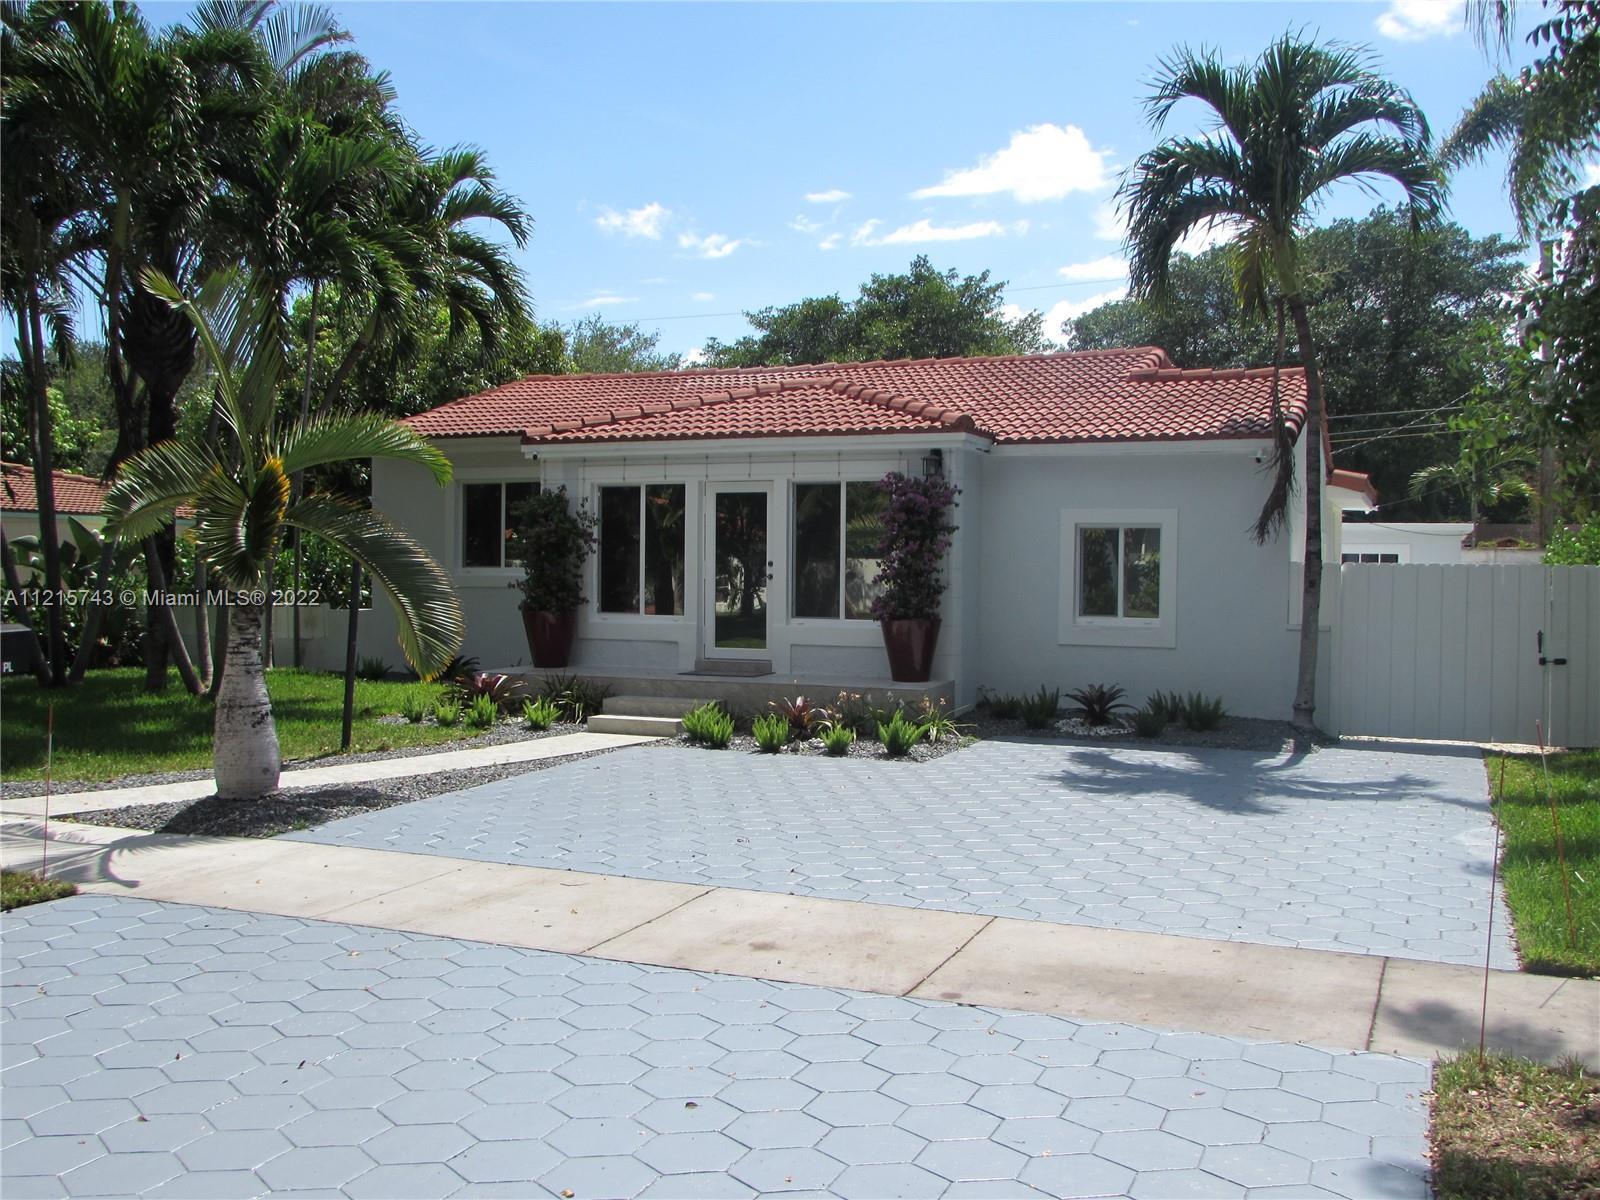 Fully renovated single family home in Miami Shores. This four bedrooom and three and a half bathroom